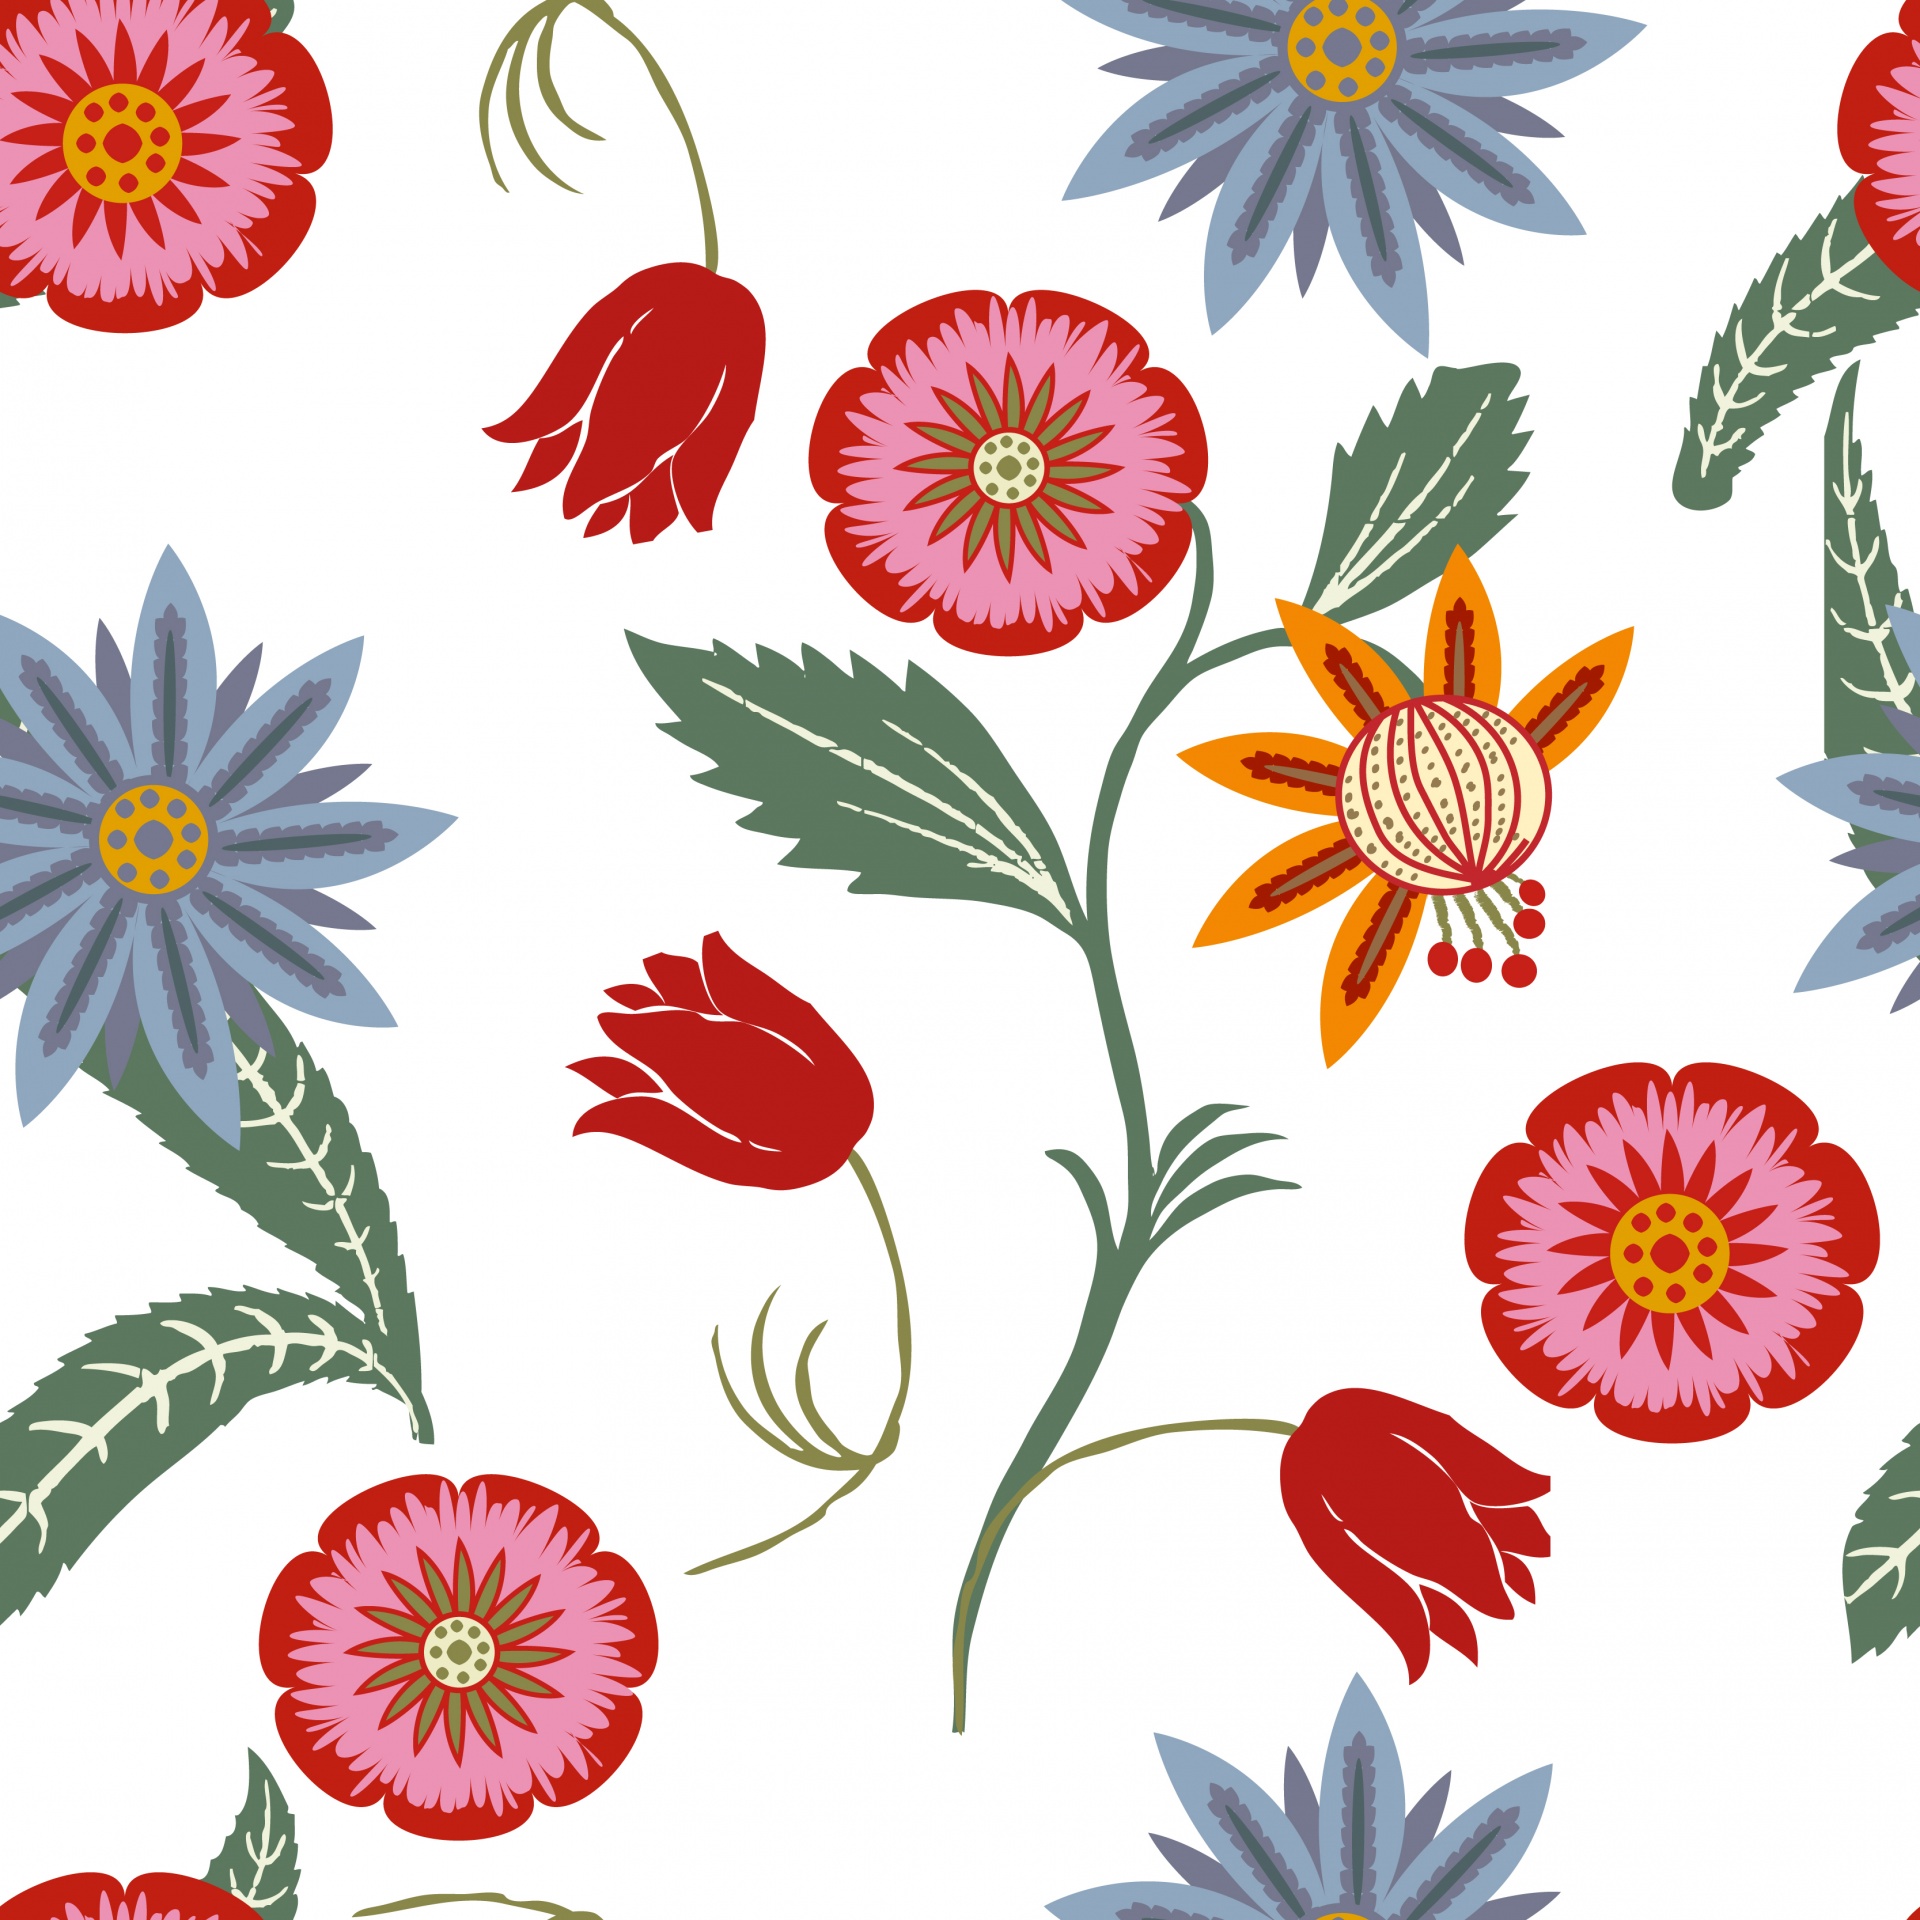 Floral wallpaper background pattern clipart